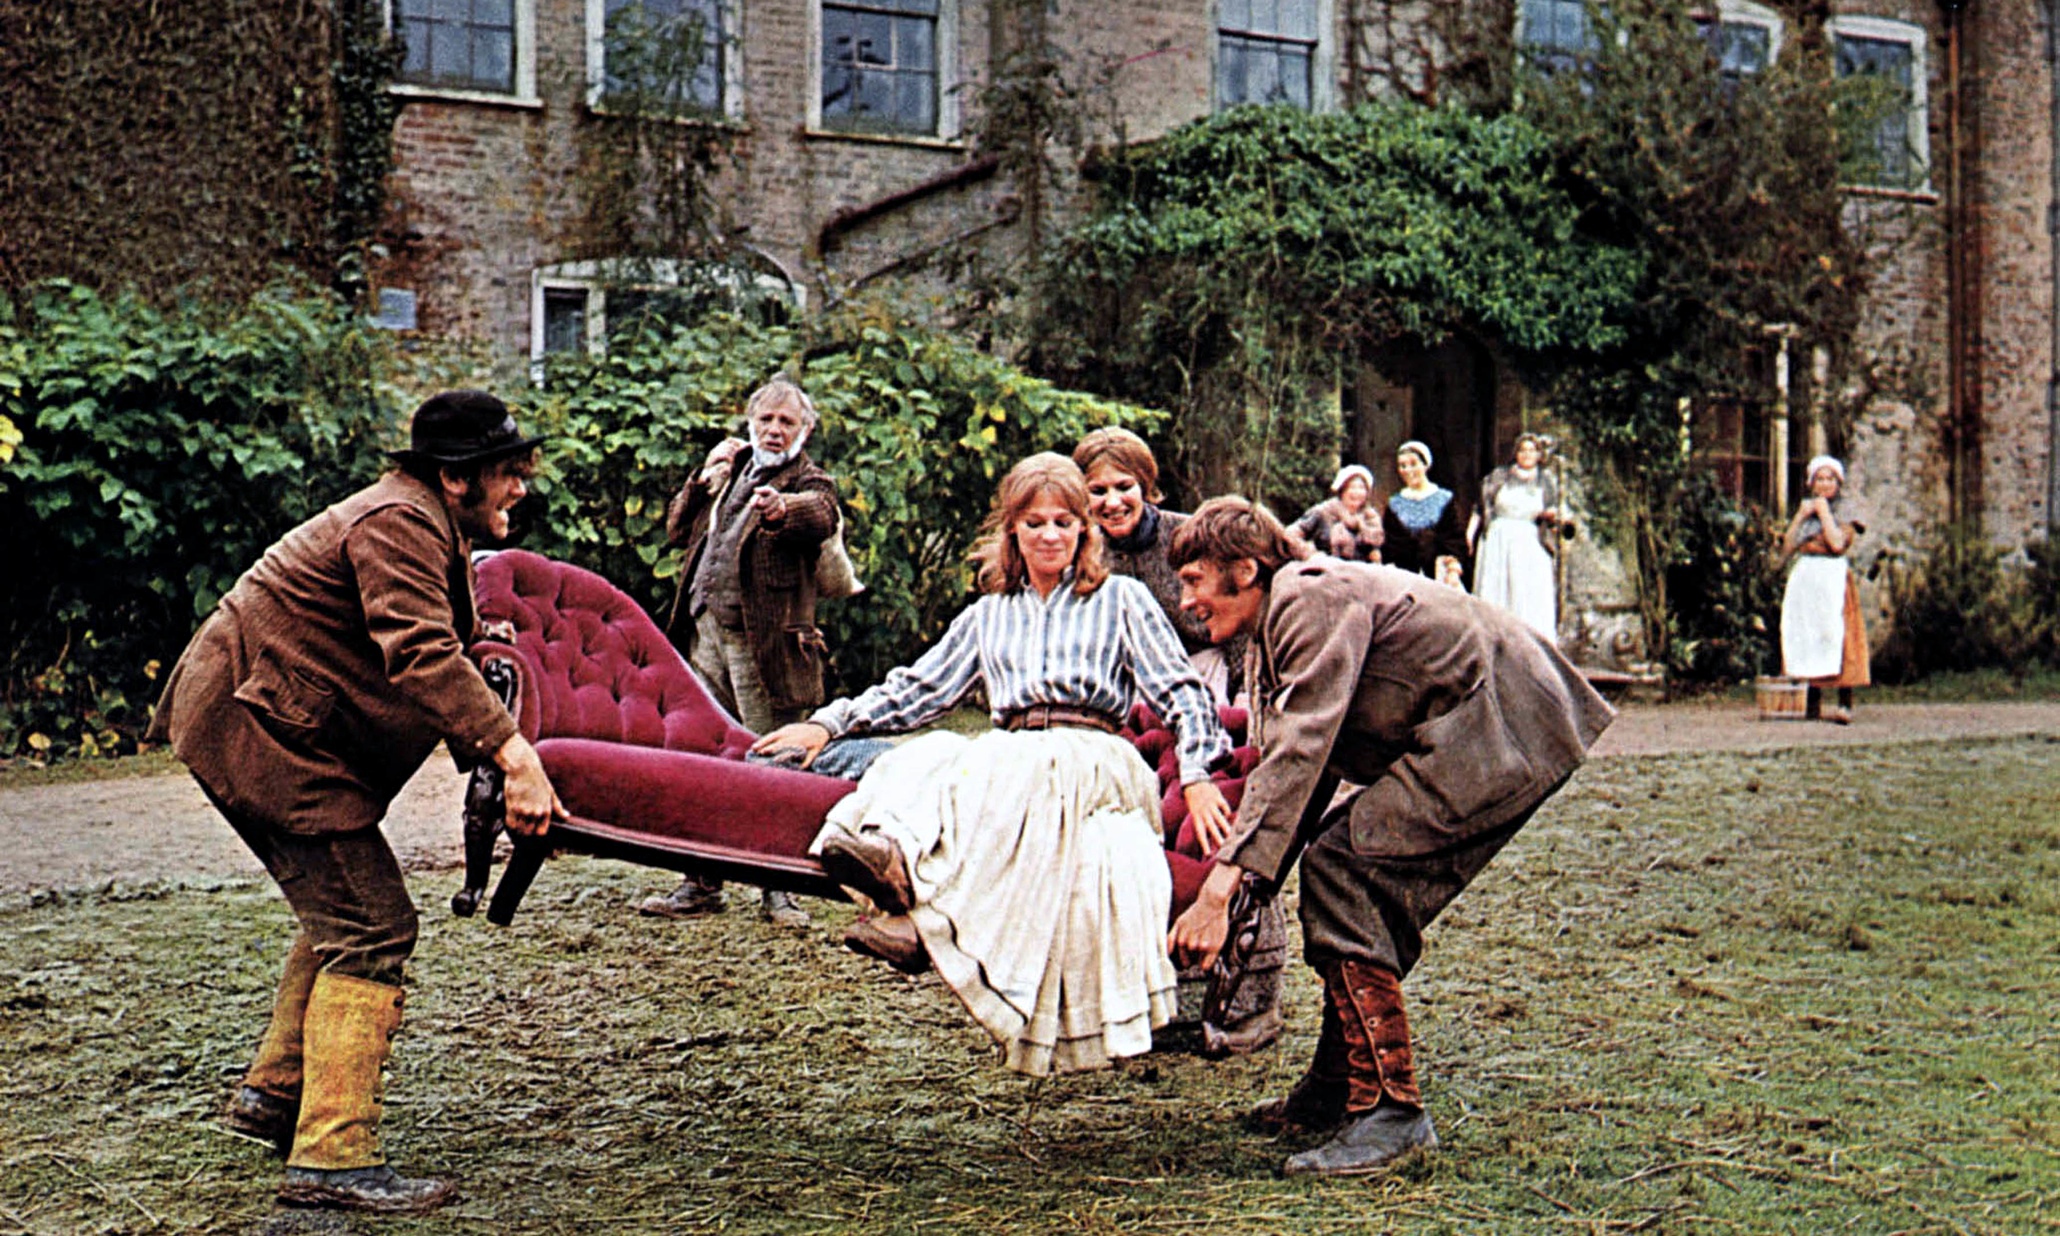 far from the madding crowd review